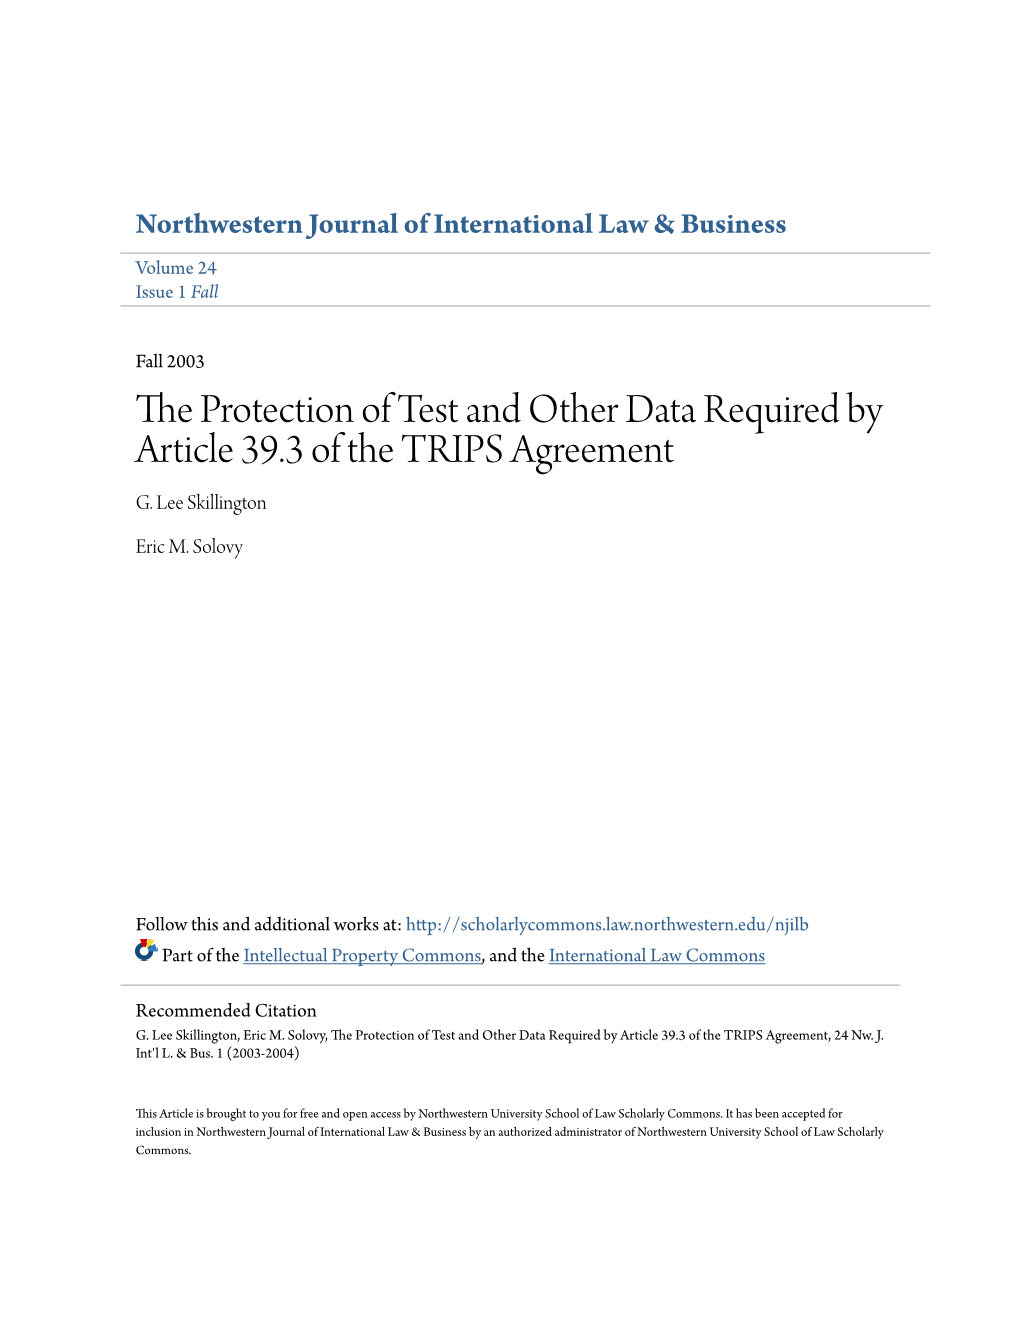 The Protection of Test and Other Data Required by Article 39.3 of the TRIPS Agreement